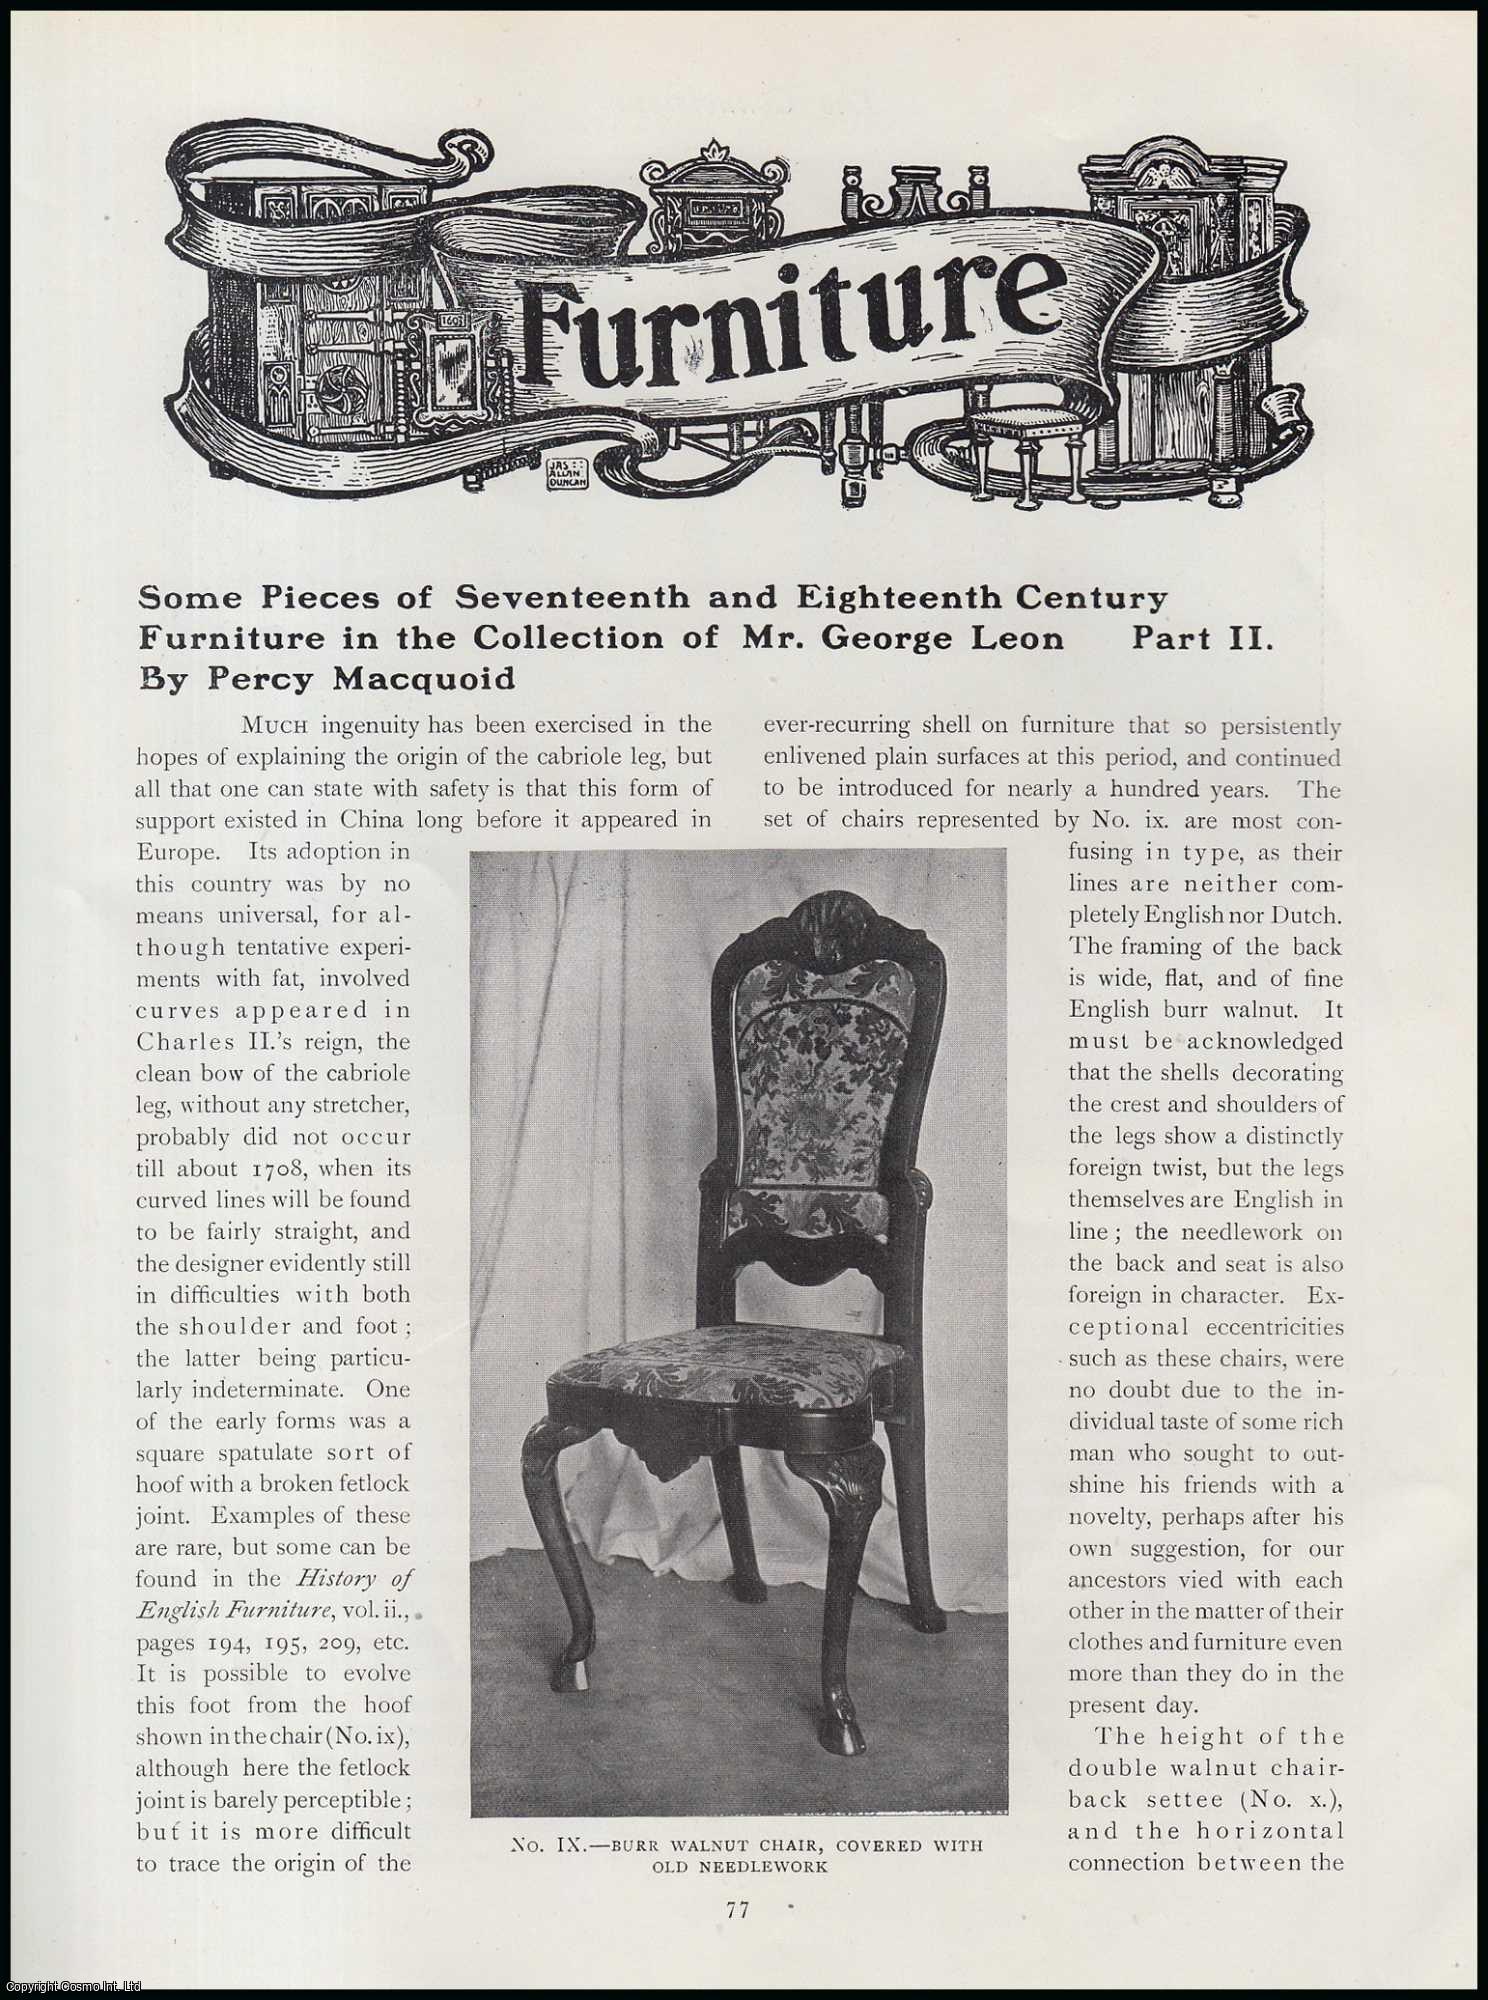 Percy Macquoid - Seventeenth & Eighteenth Century Furniture (part 2) Formed by Mr. George Leon : A Small Collection. An original article from The Connoisseur, 1917.